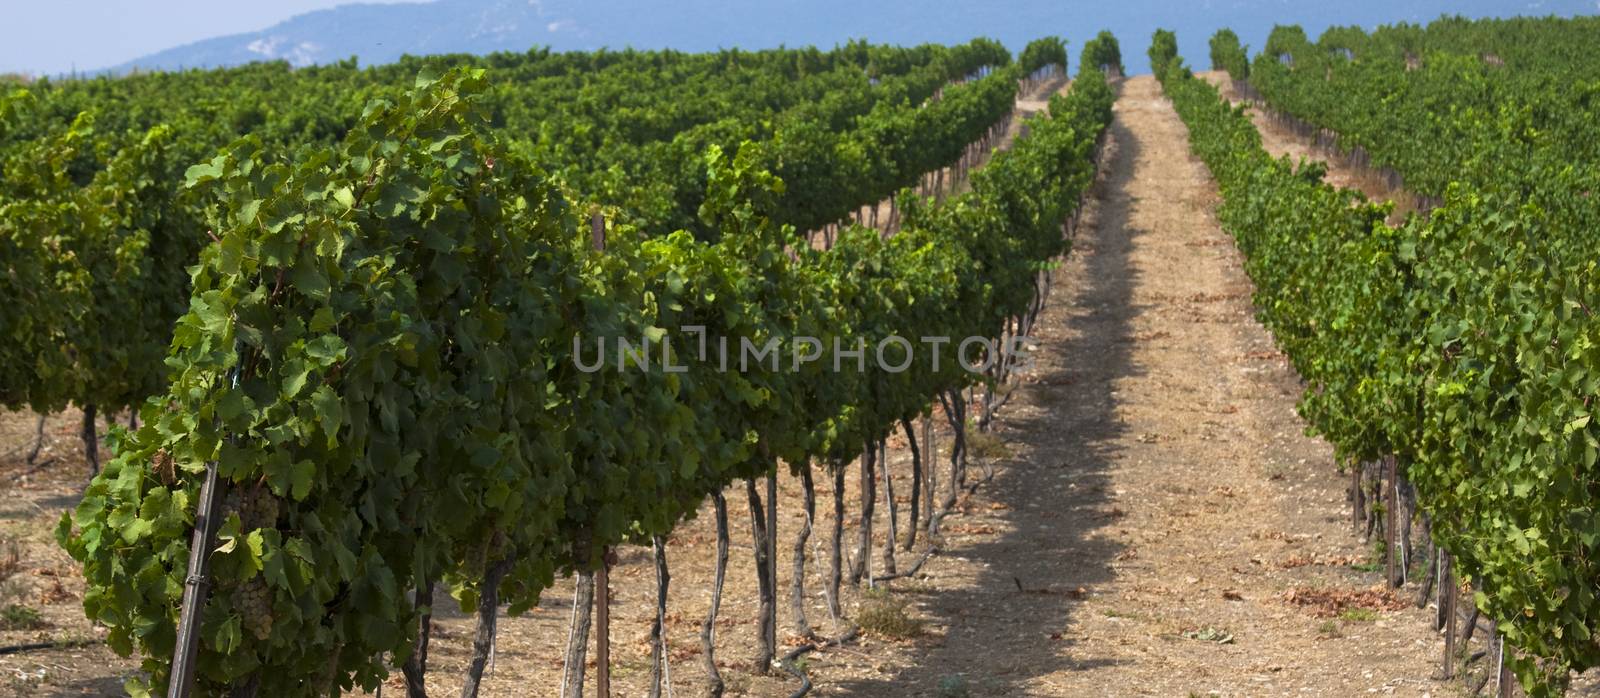 wineyard rows on a hill with grapes in the north of israel